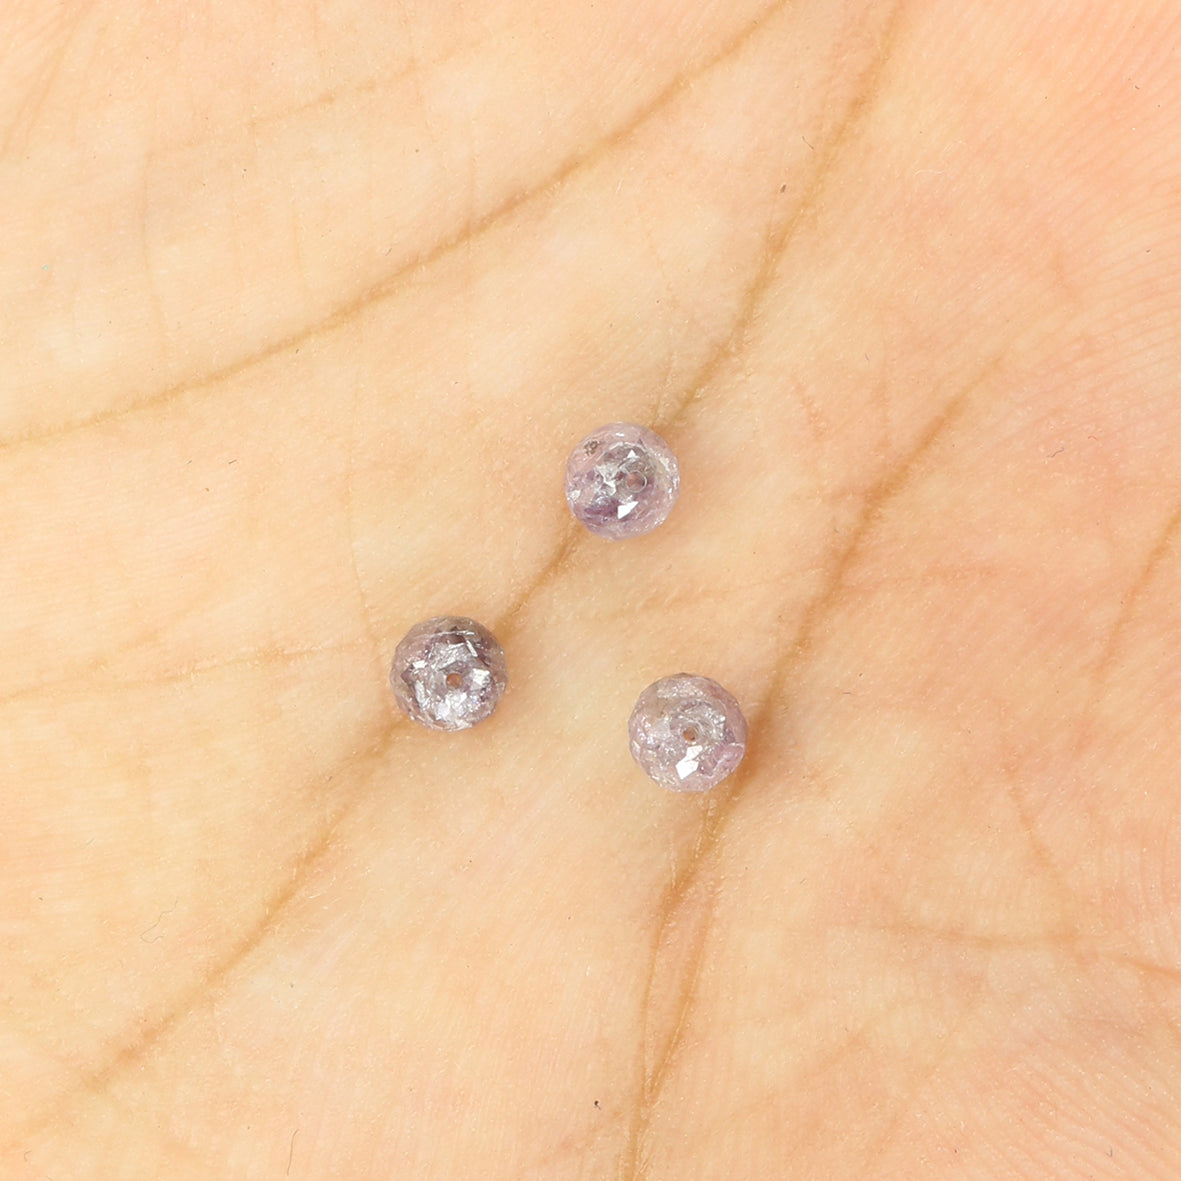 0.99 CT Faceted Bead Diamond, Natural Loose Diamond, Pink Bead Diamond, Faceted Diamond Bead, Beads Loose Diamond, Beads For Necklace L9804